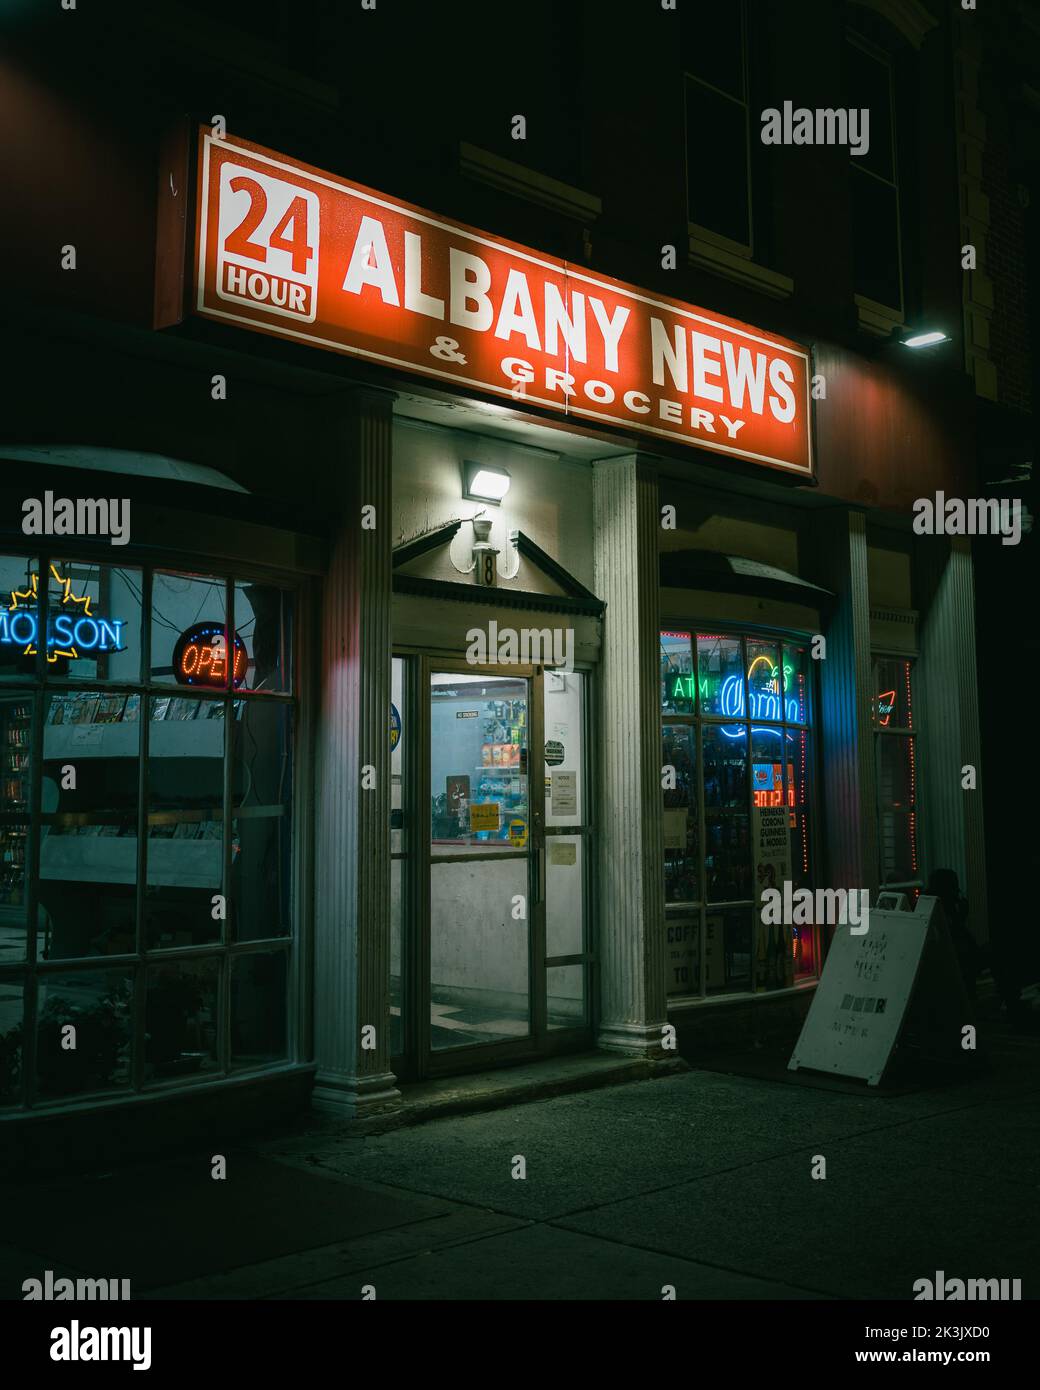 24 Hour Albany News and Grocery sign at night, Albany, New York Stock Photo